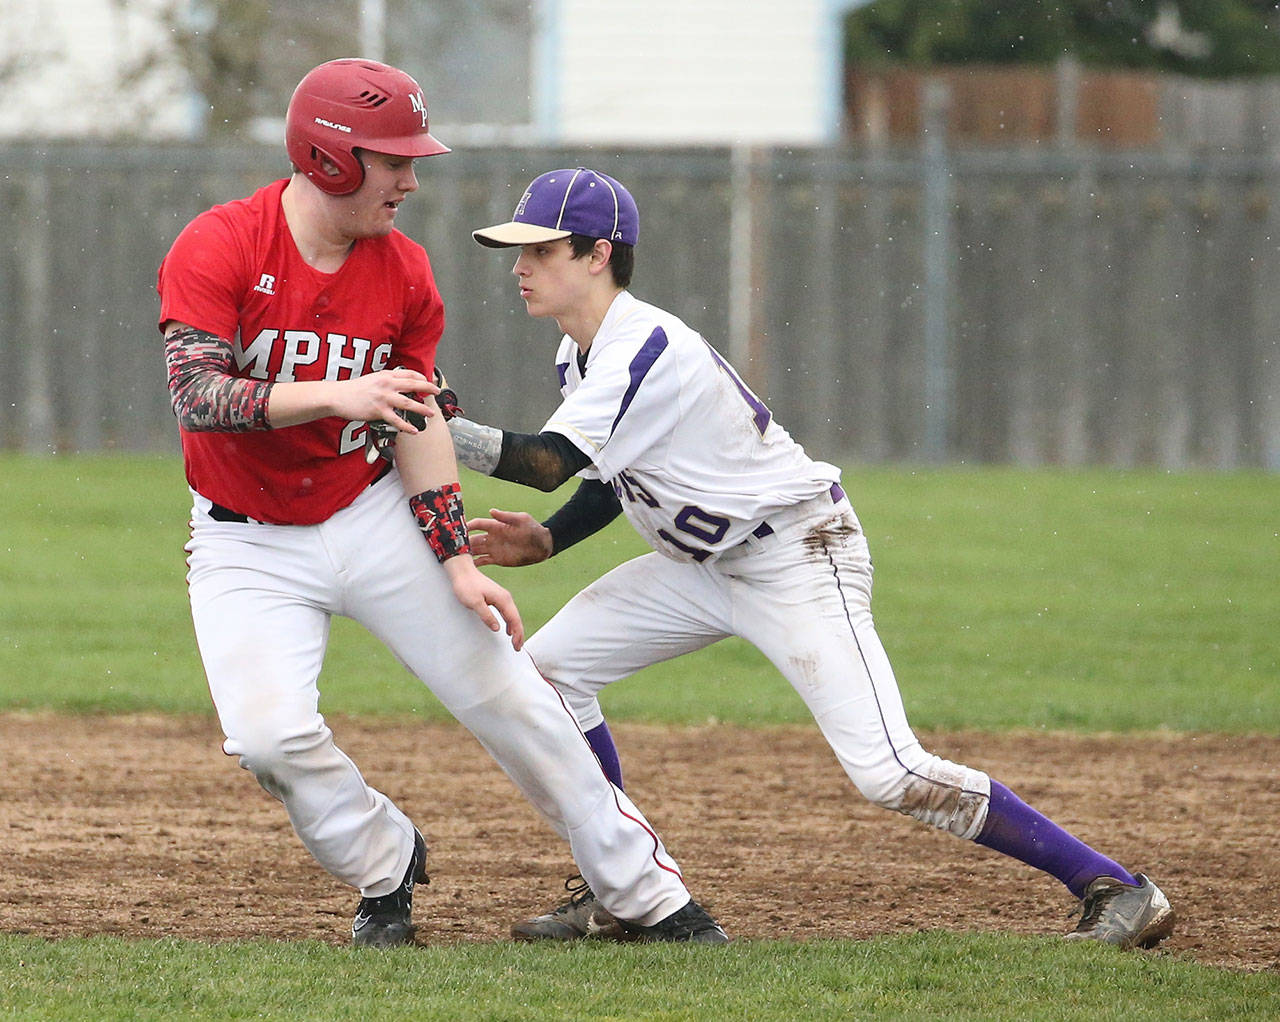 Cory Roberts tags M-P’s Colby Phelps in a rundown Wednesday. (Photo by John Fisken)